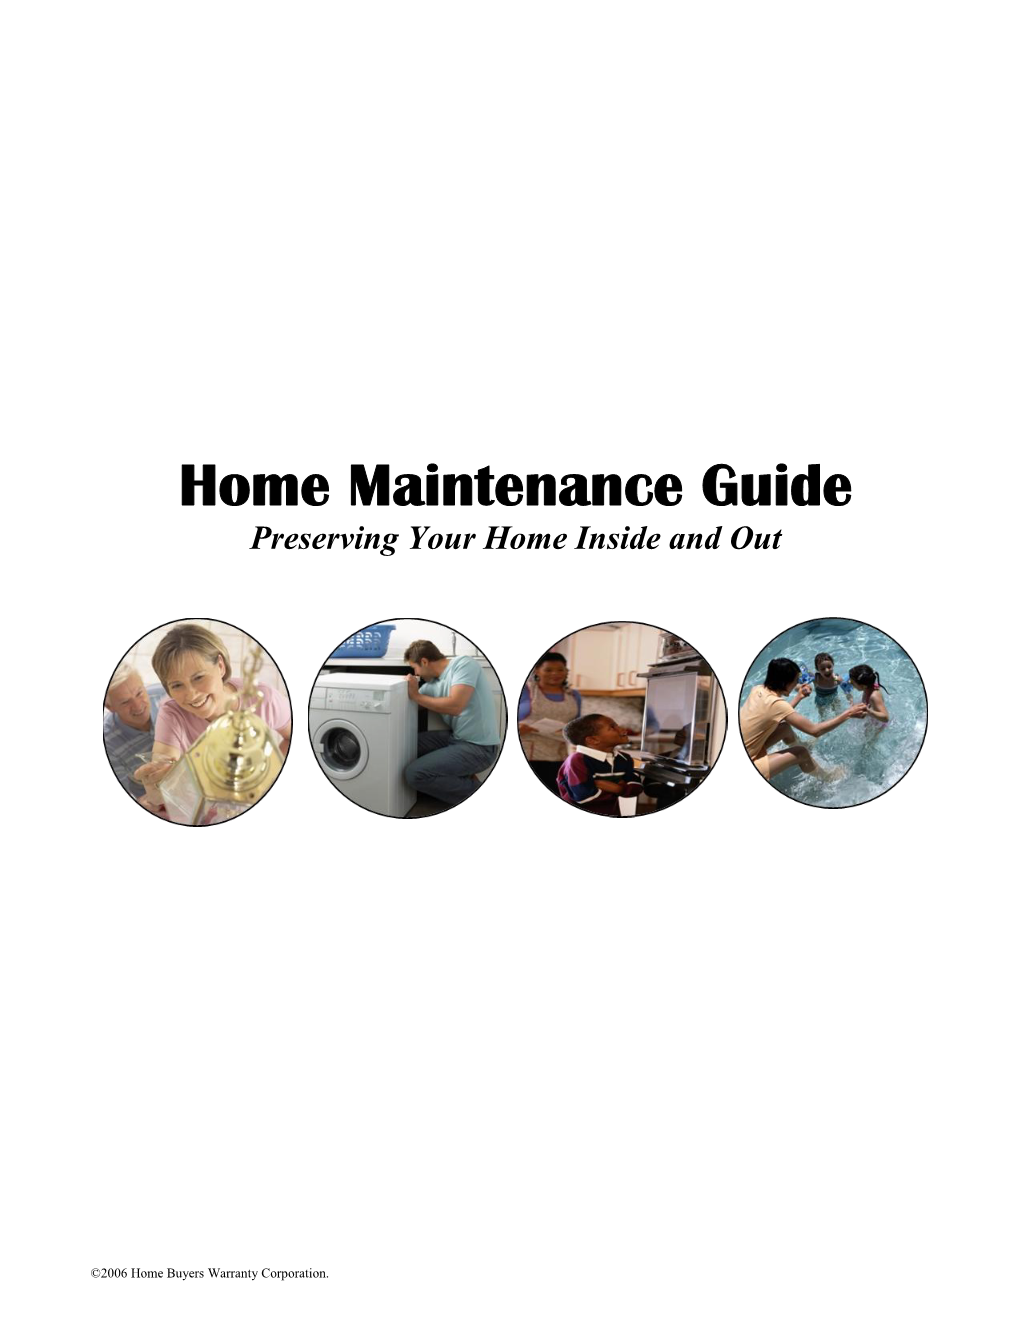 Home Maintenance Guide Preserving Your Home Inside and Out